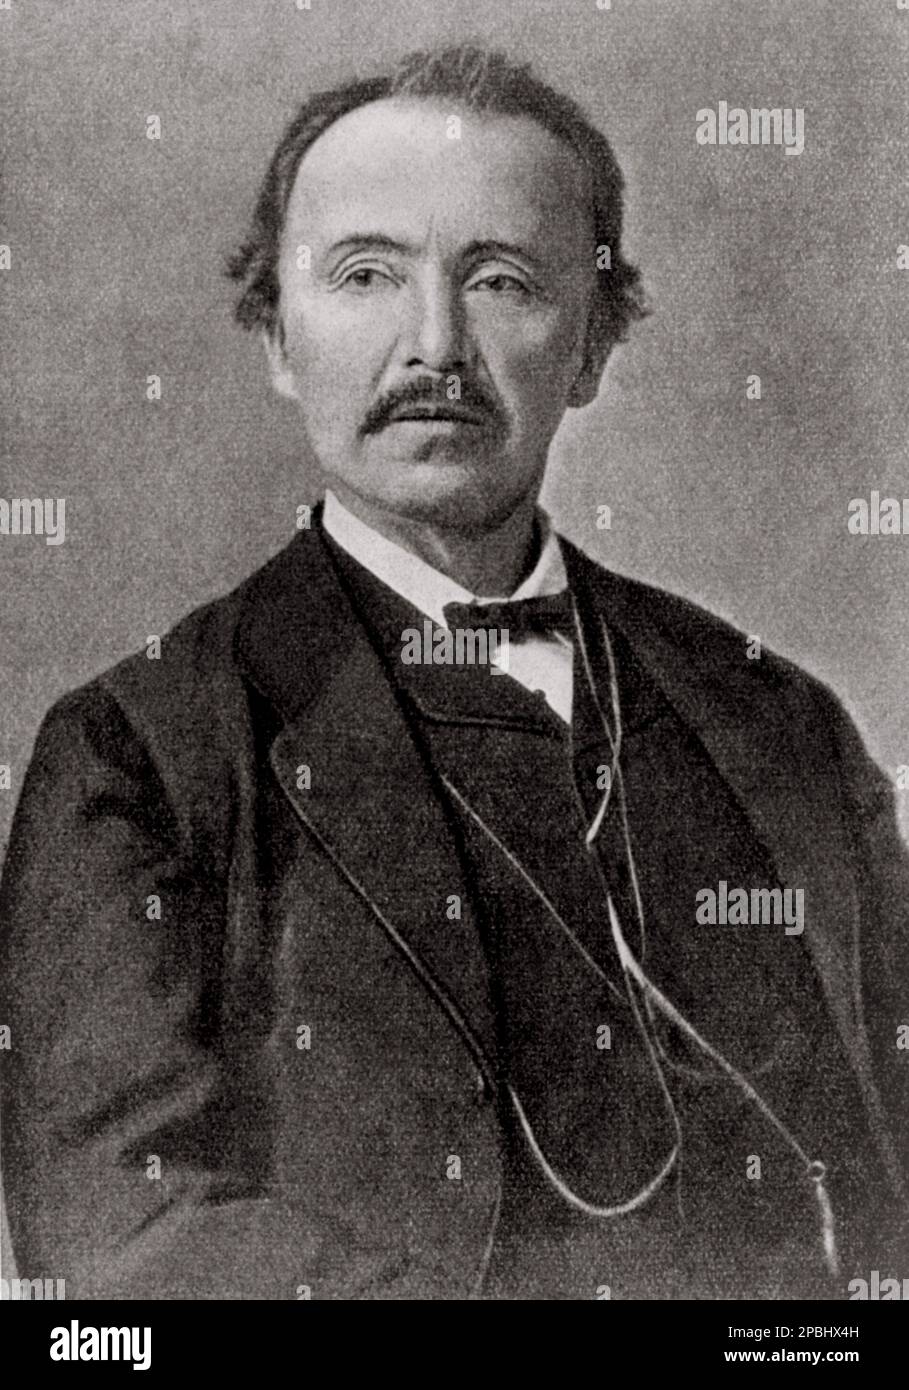 The german archeologist HEINRICH SCHLIEMANN ( 1822 in Neubukow, Mecklenburg-Schwerin -  1890 in Naples , Italy ) was a German treasure hunter, an advocate of the historical reality of places mentioned in the works of Homer, and an important excavator of Troy and of the Mycenaean sites Mycenae and Tiryns . - FOTO STORICHE - HISTORY - OMERO - TROIA - MICENE - GEOGRAFIA - GEOGRAPHY  - ARCHITETTURA - ARCHITECTURE - ROME - ARCHEOLOGIA - ARCHEOLOGY - baffi - moustache - papillon - tie bow - cravatta - Grecia - Greece - ART - ARTS   ----  Archivio GBB Stock Photo